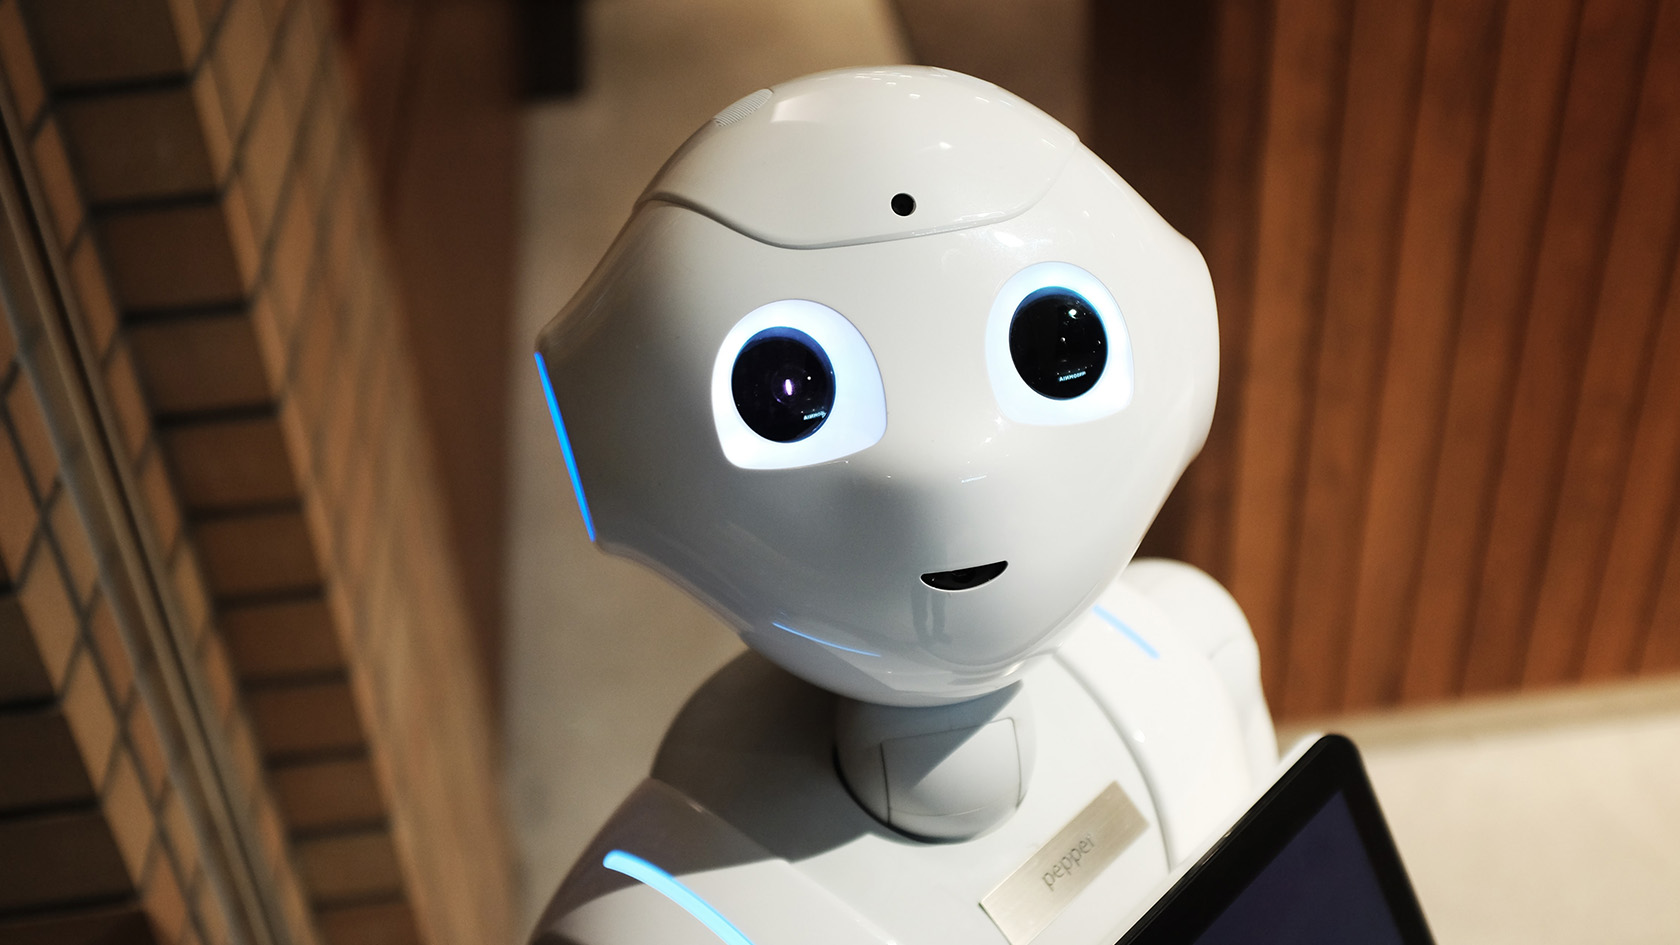 Image of Pepper, a humanoid robot by Softbank